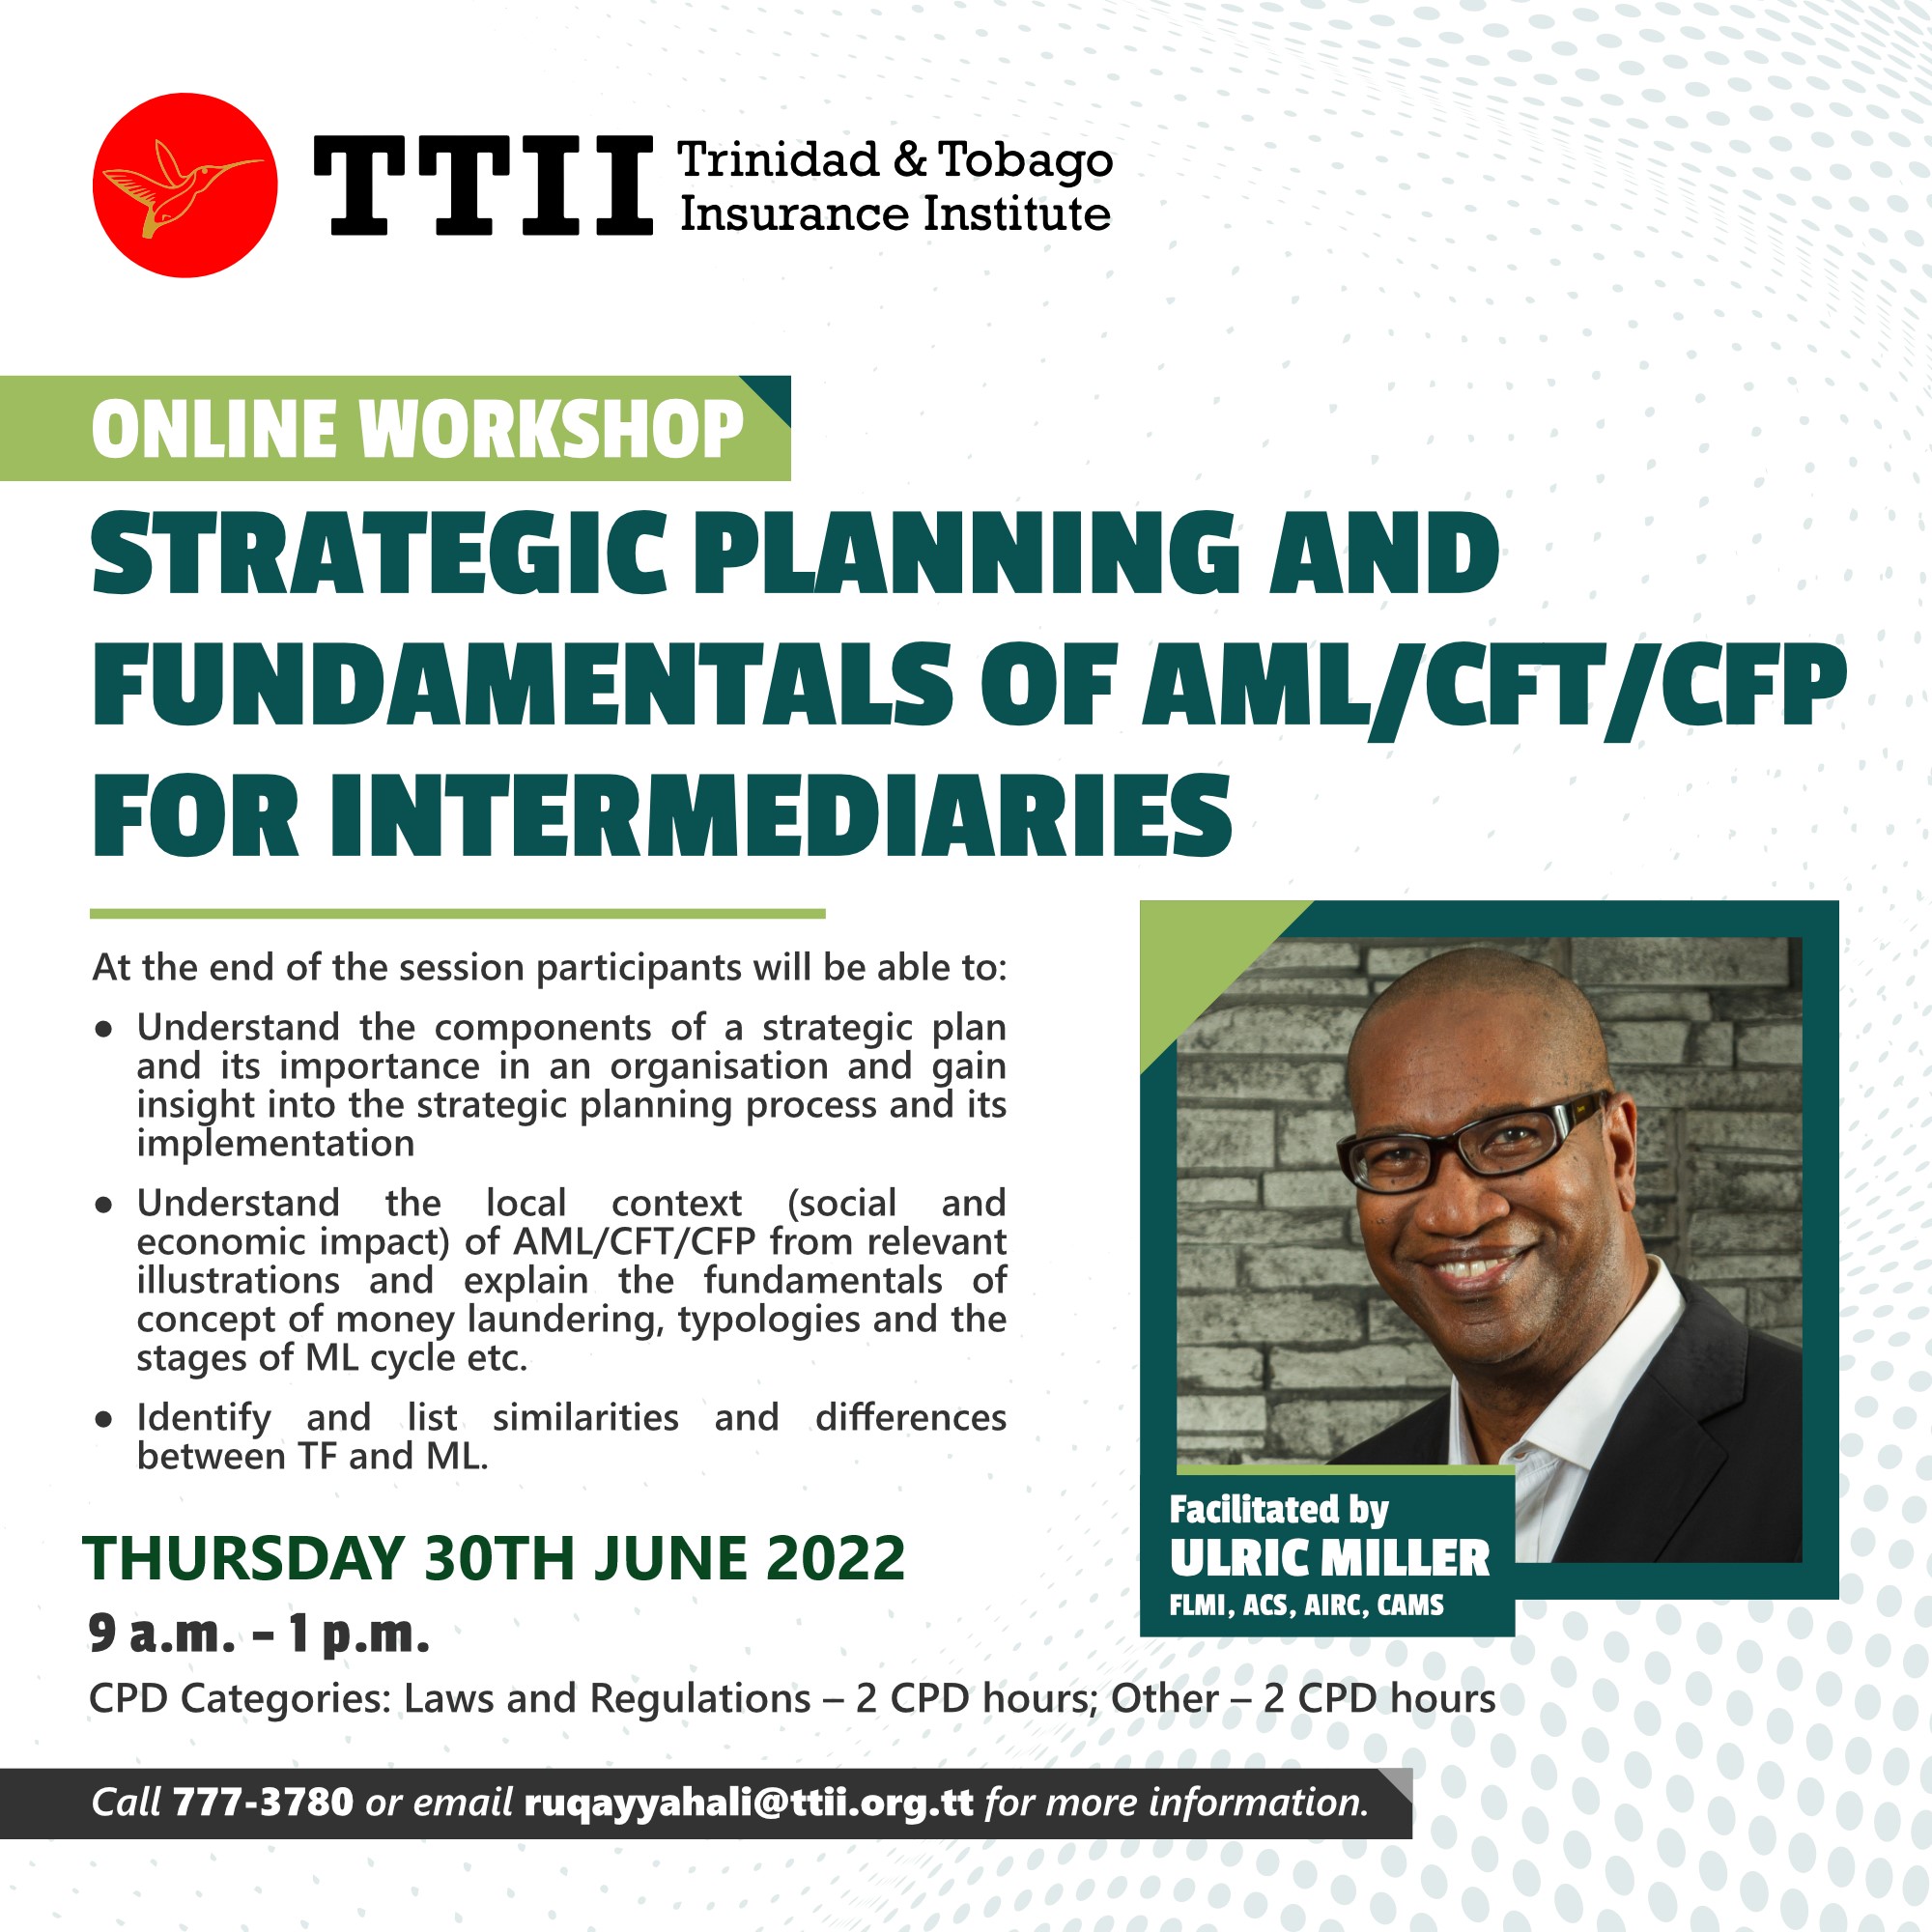 Strategic Planning and Fundamentals of AML/CFT/CPF for Intermediaries